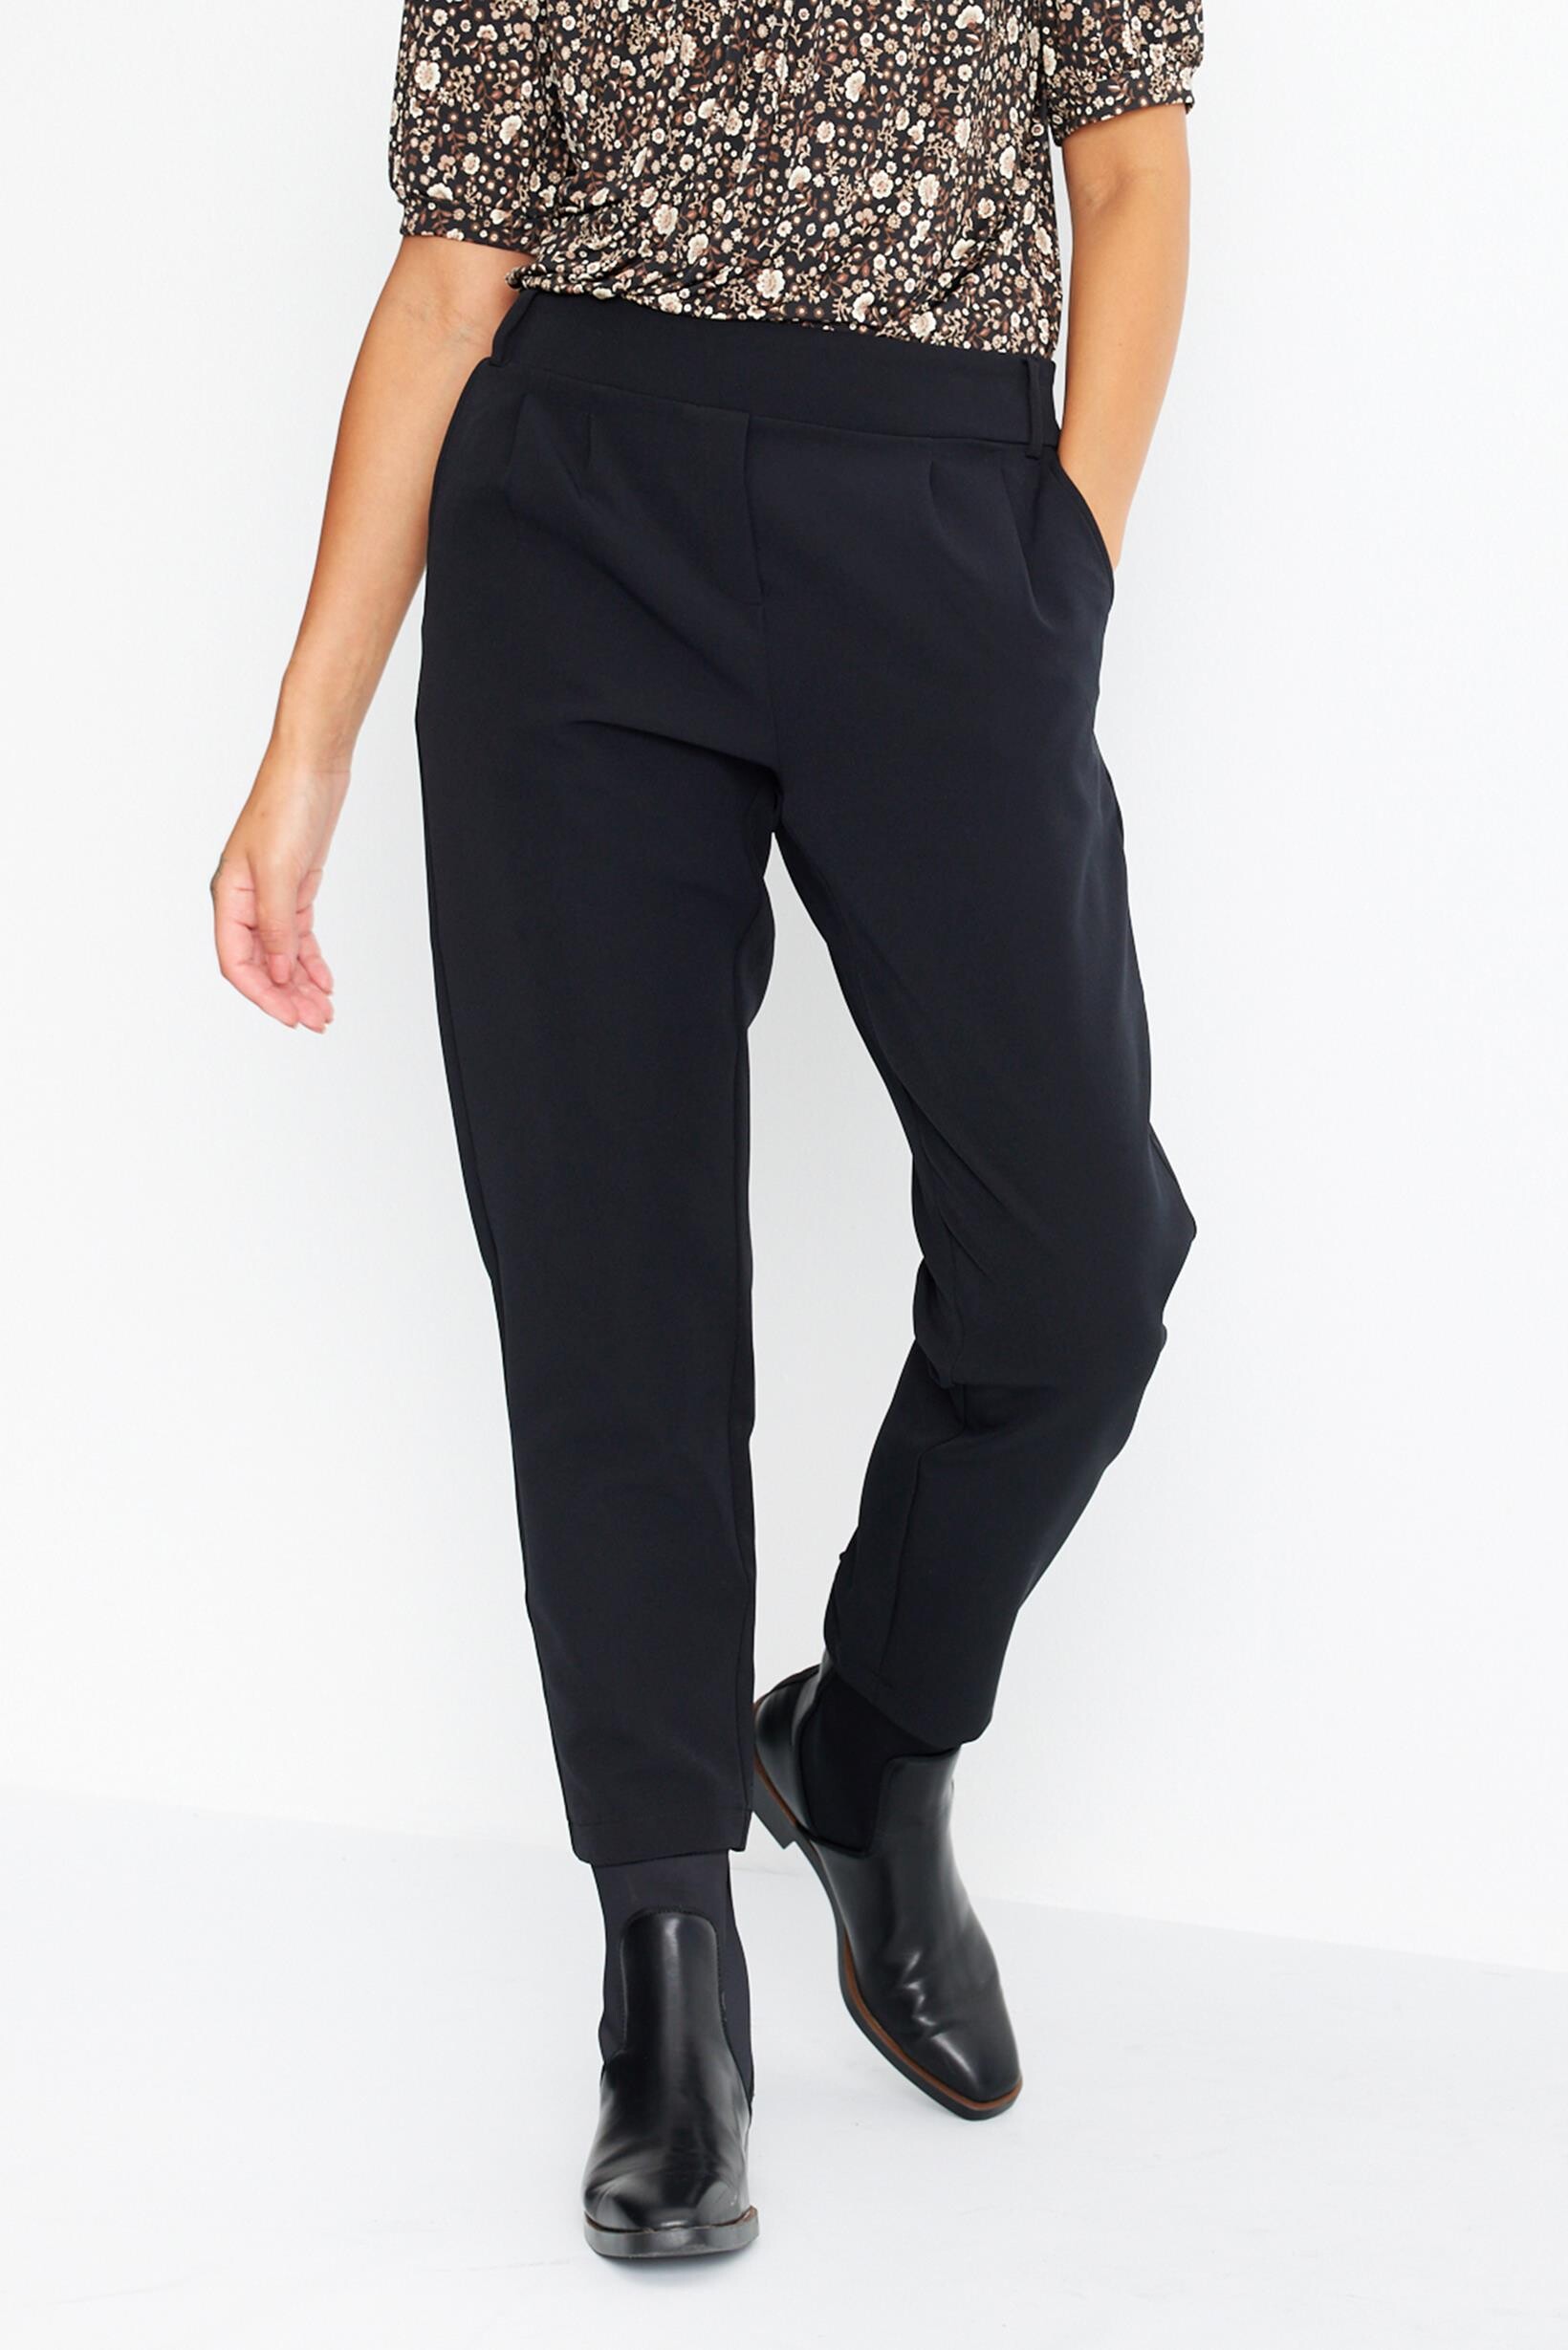 IN FRONT LEA PANT 15216 999